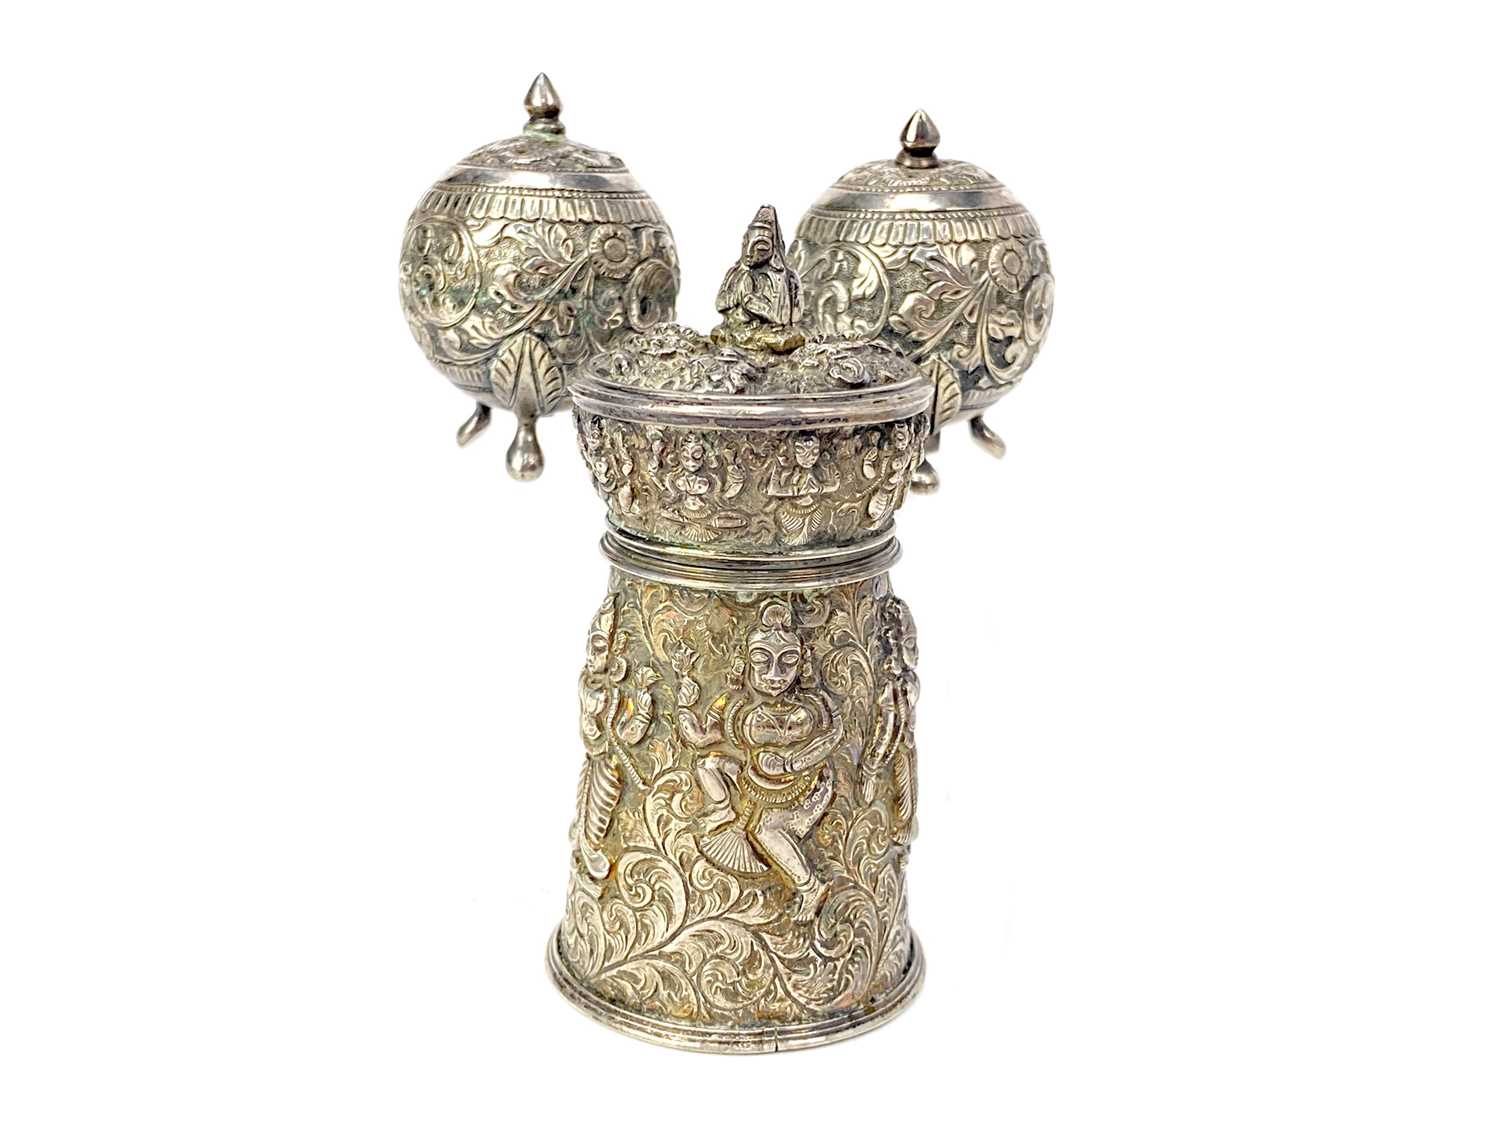 Lot 702 - AN INDIAN WHITE METAL PEPPER GRINDER AND A PAIR OF METAL CONDIMENT CASTERS